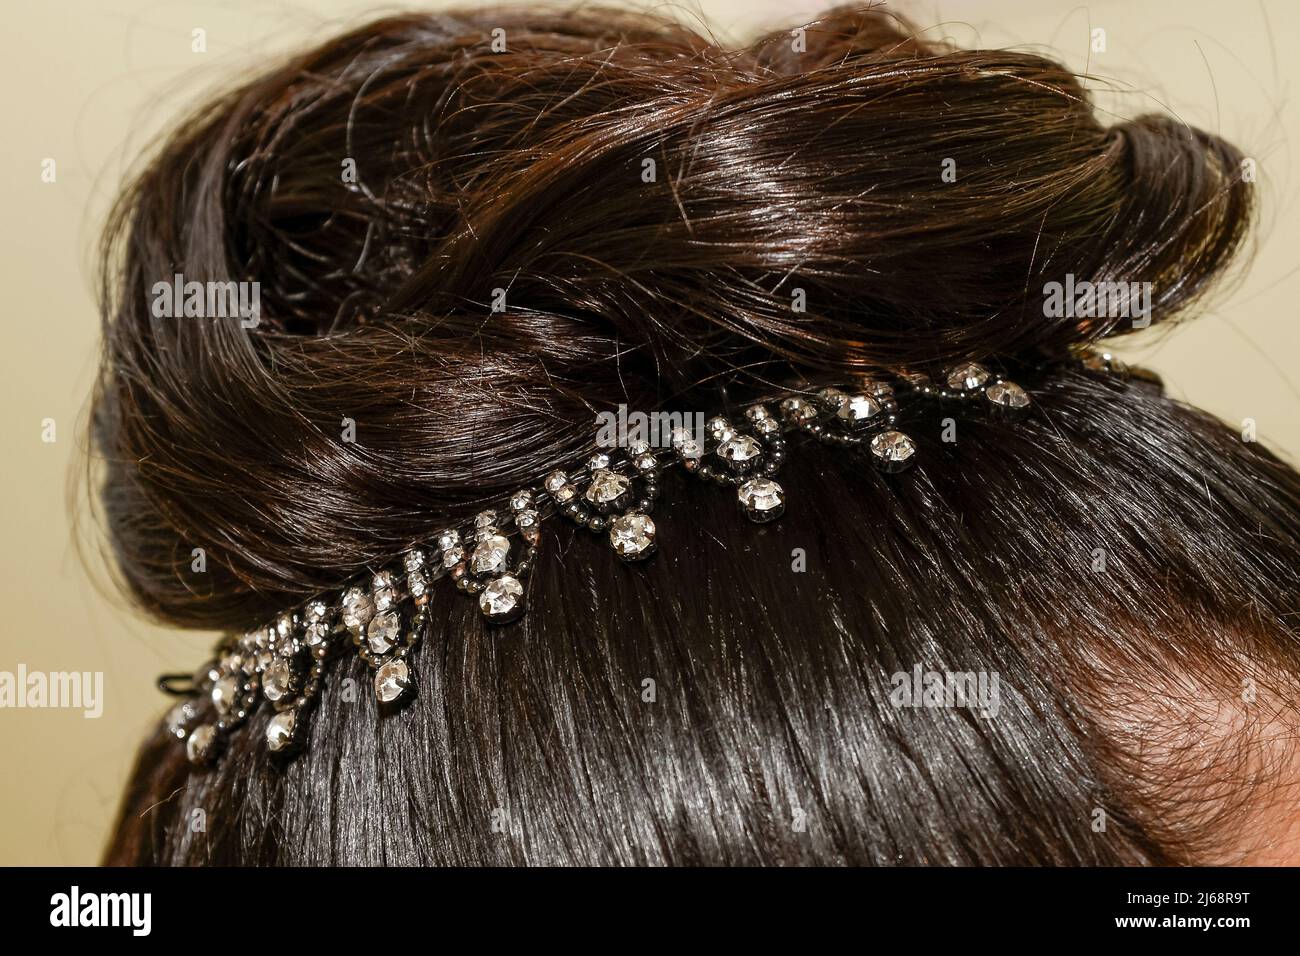 A rhinestone embellishment in the hairstyle of a black-haired bride on her wedding day. Stock Photo